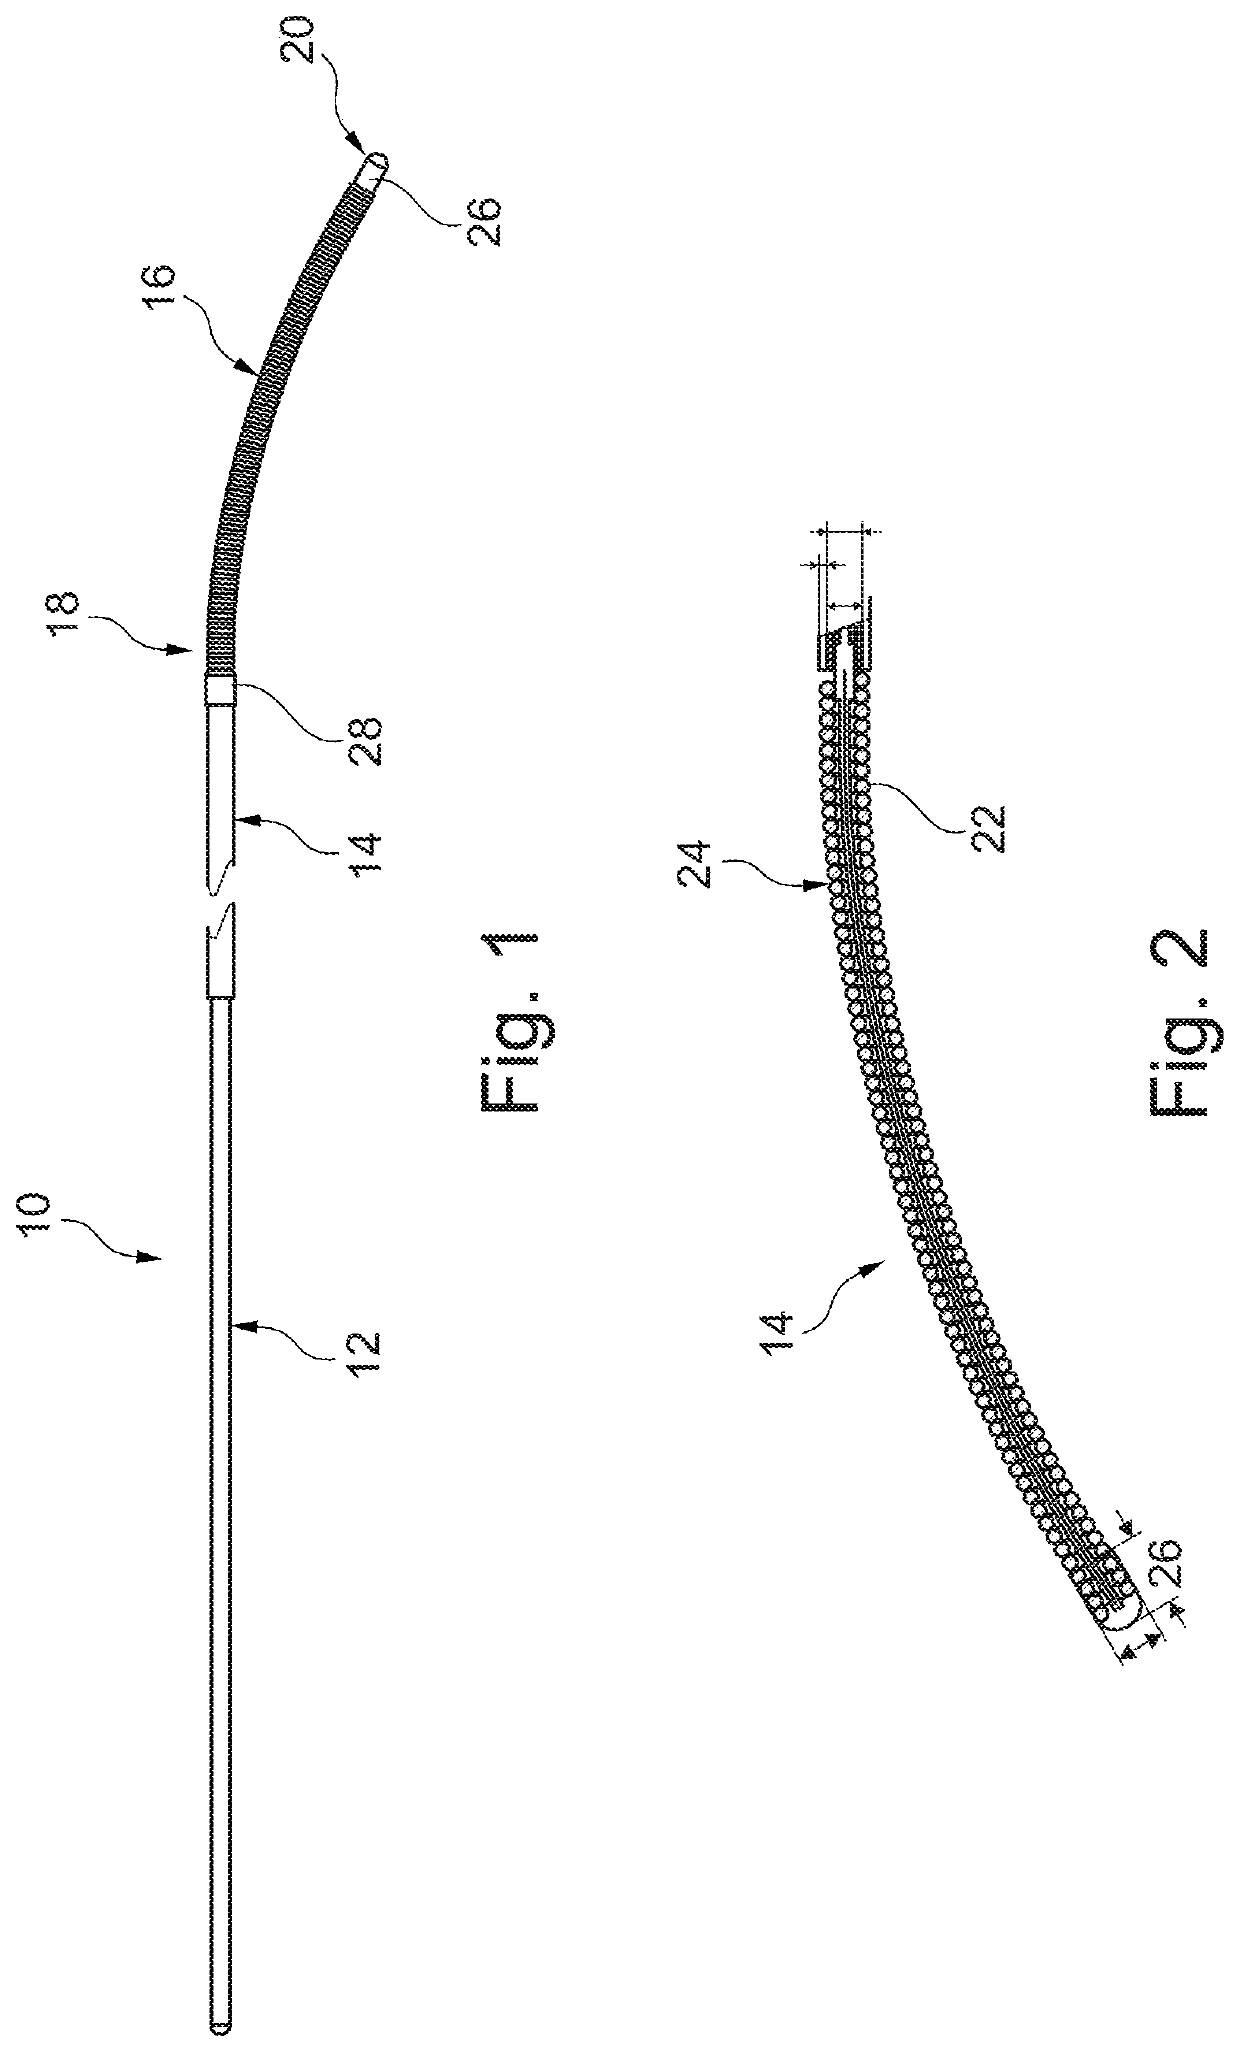 Apparatus and method of occluding a vessel by ablation